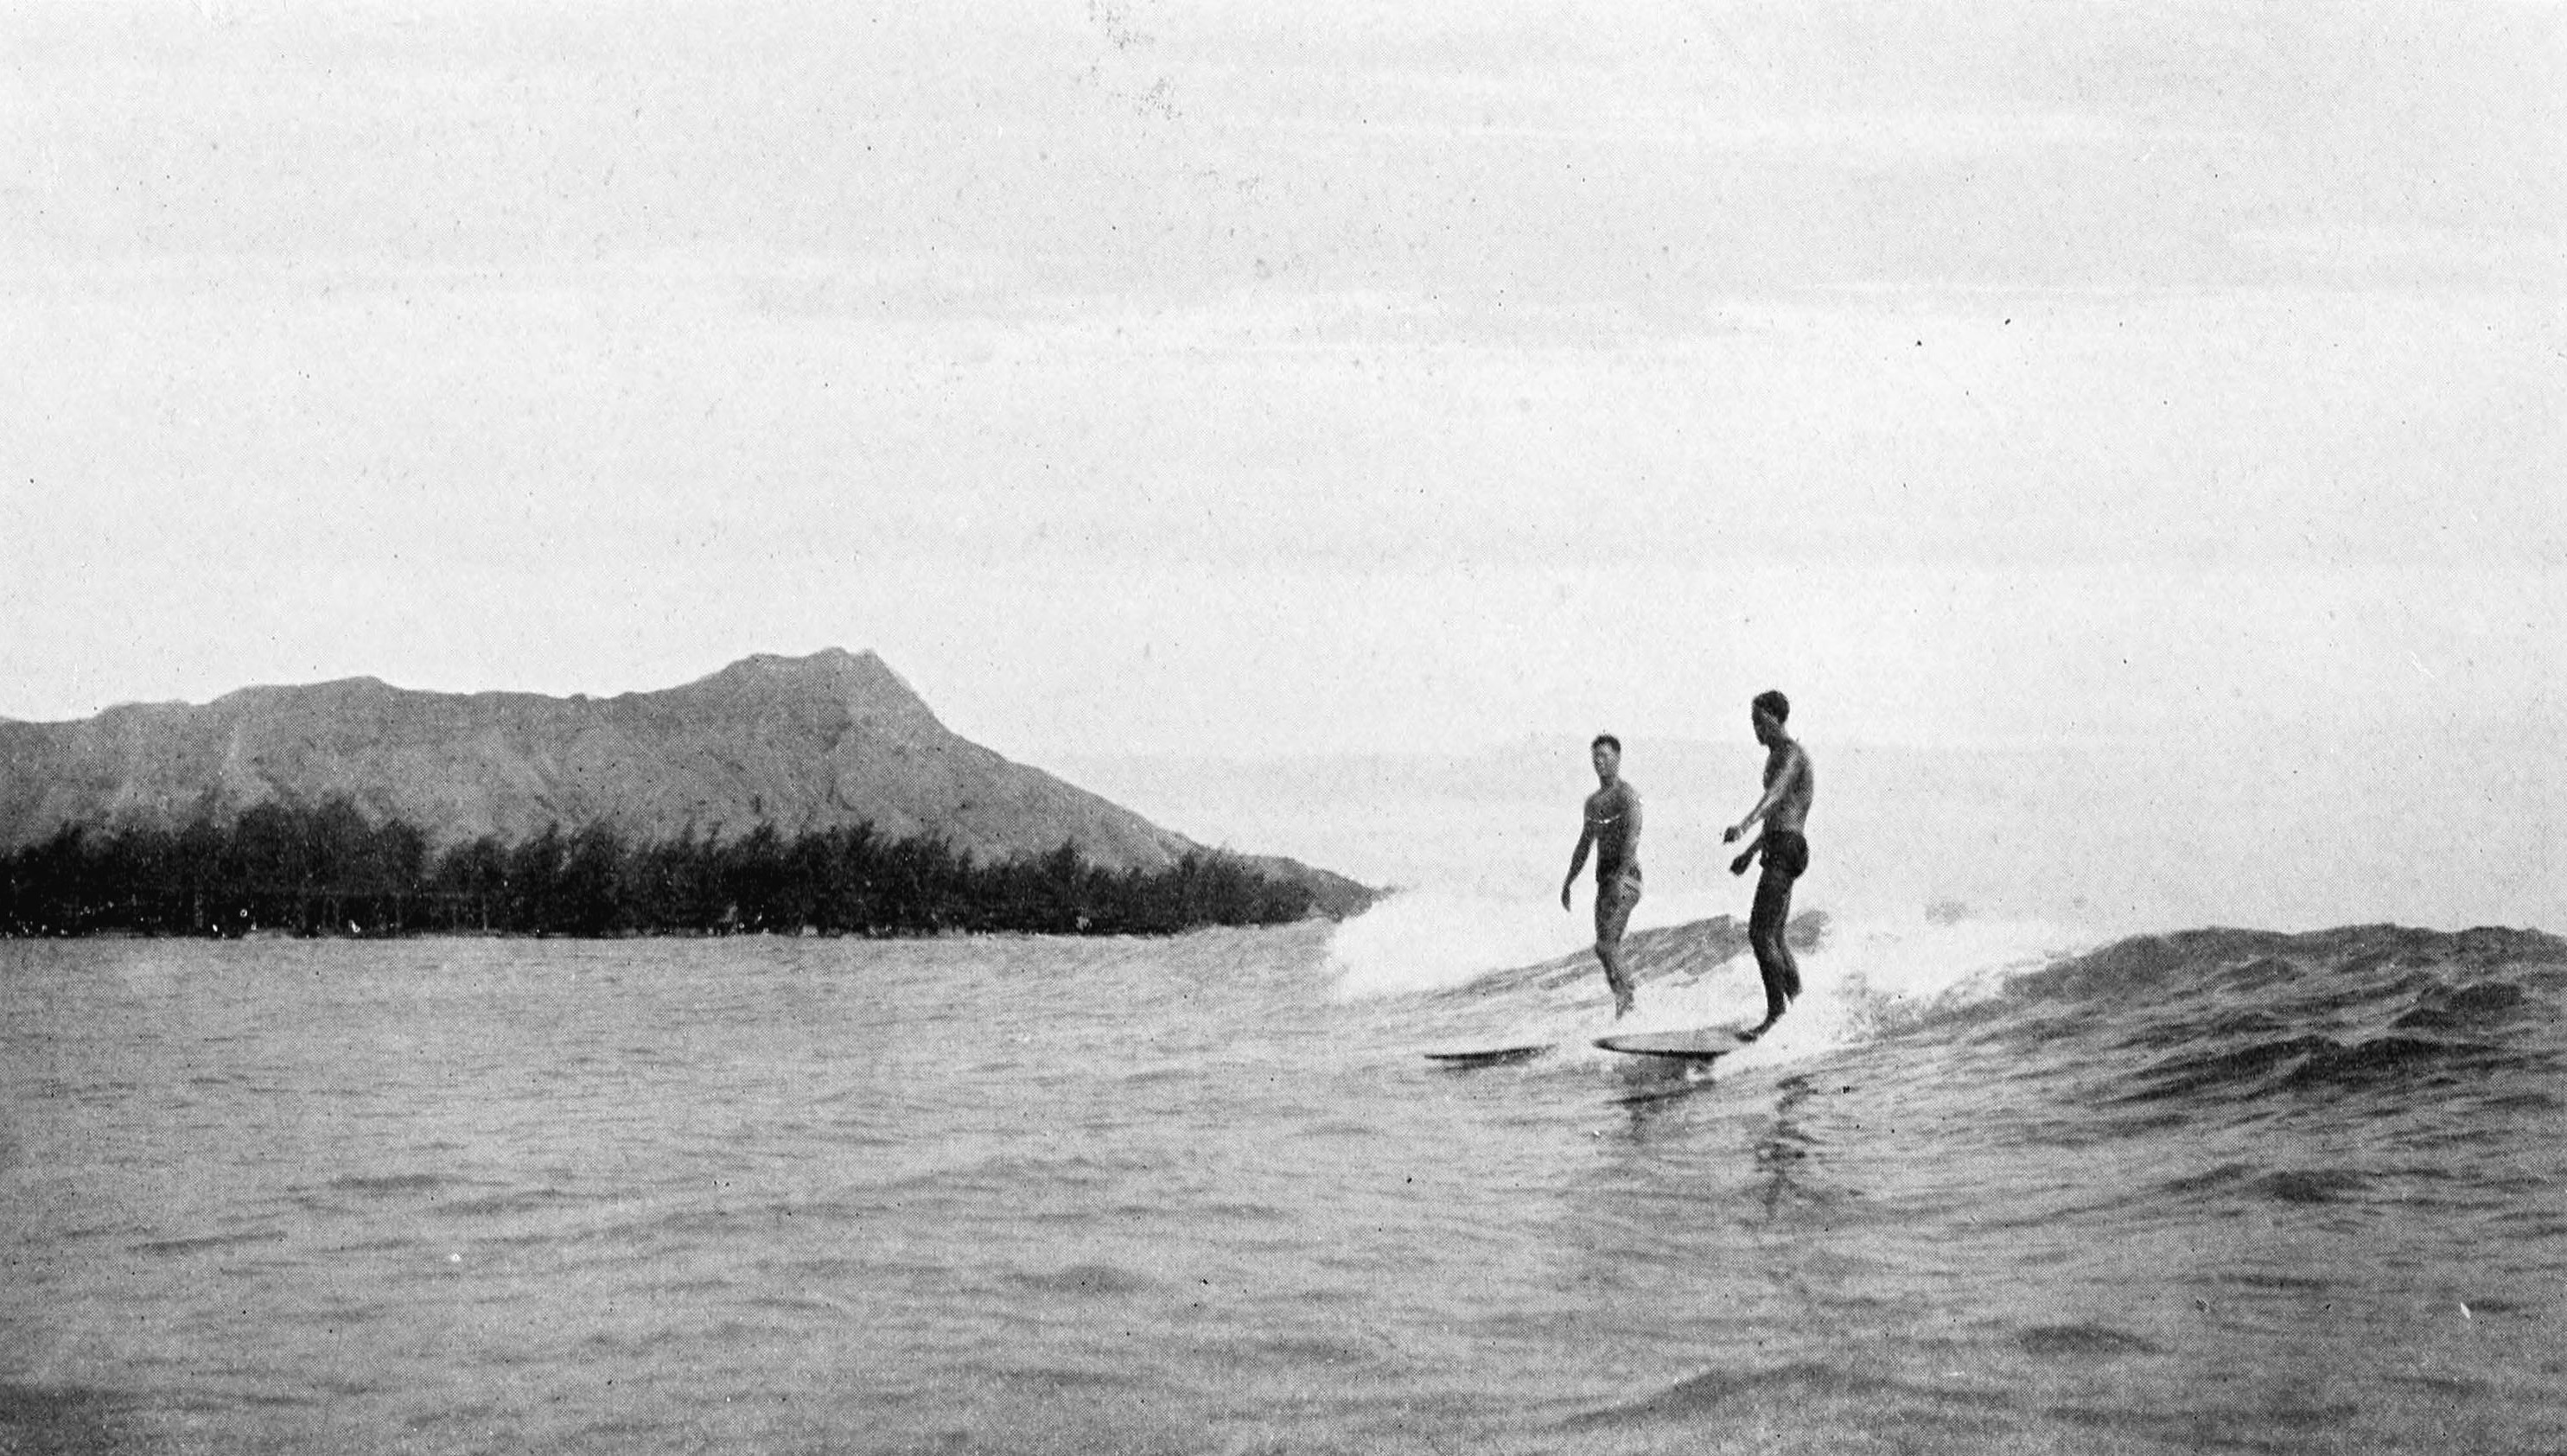 [Surfing at Waikīkī, 1921] At the left is Diamond Head. From Collier's New Encyclopedia.